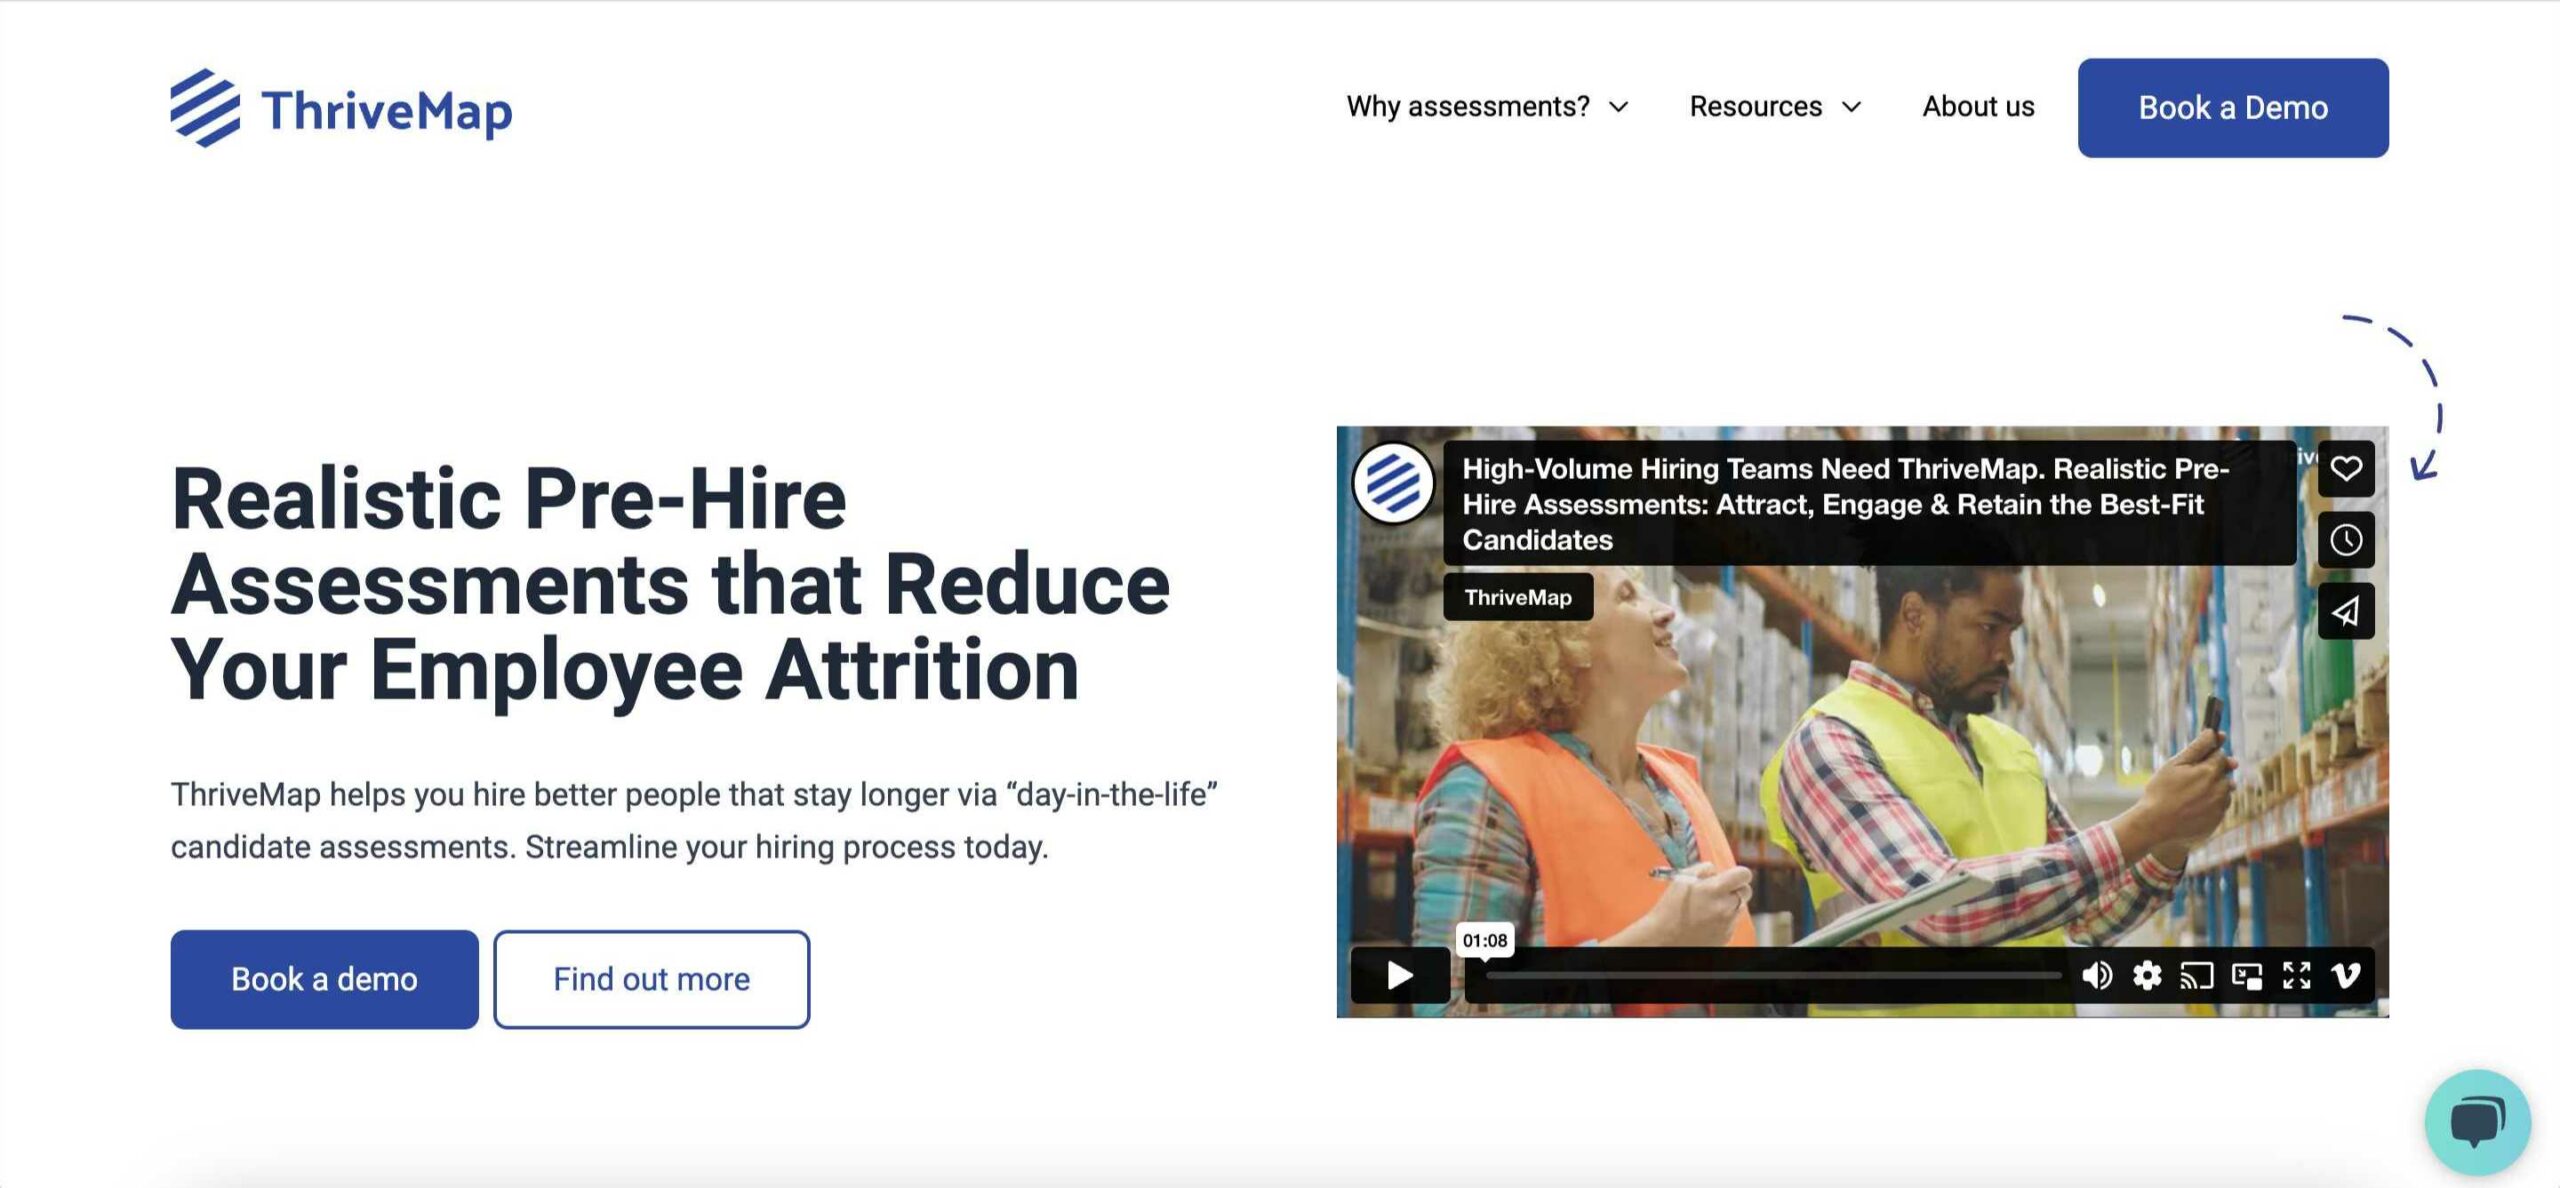 ThriveMap is a great tool to fight employee attrition.